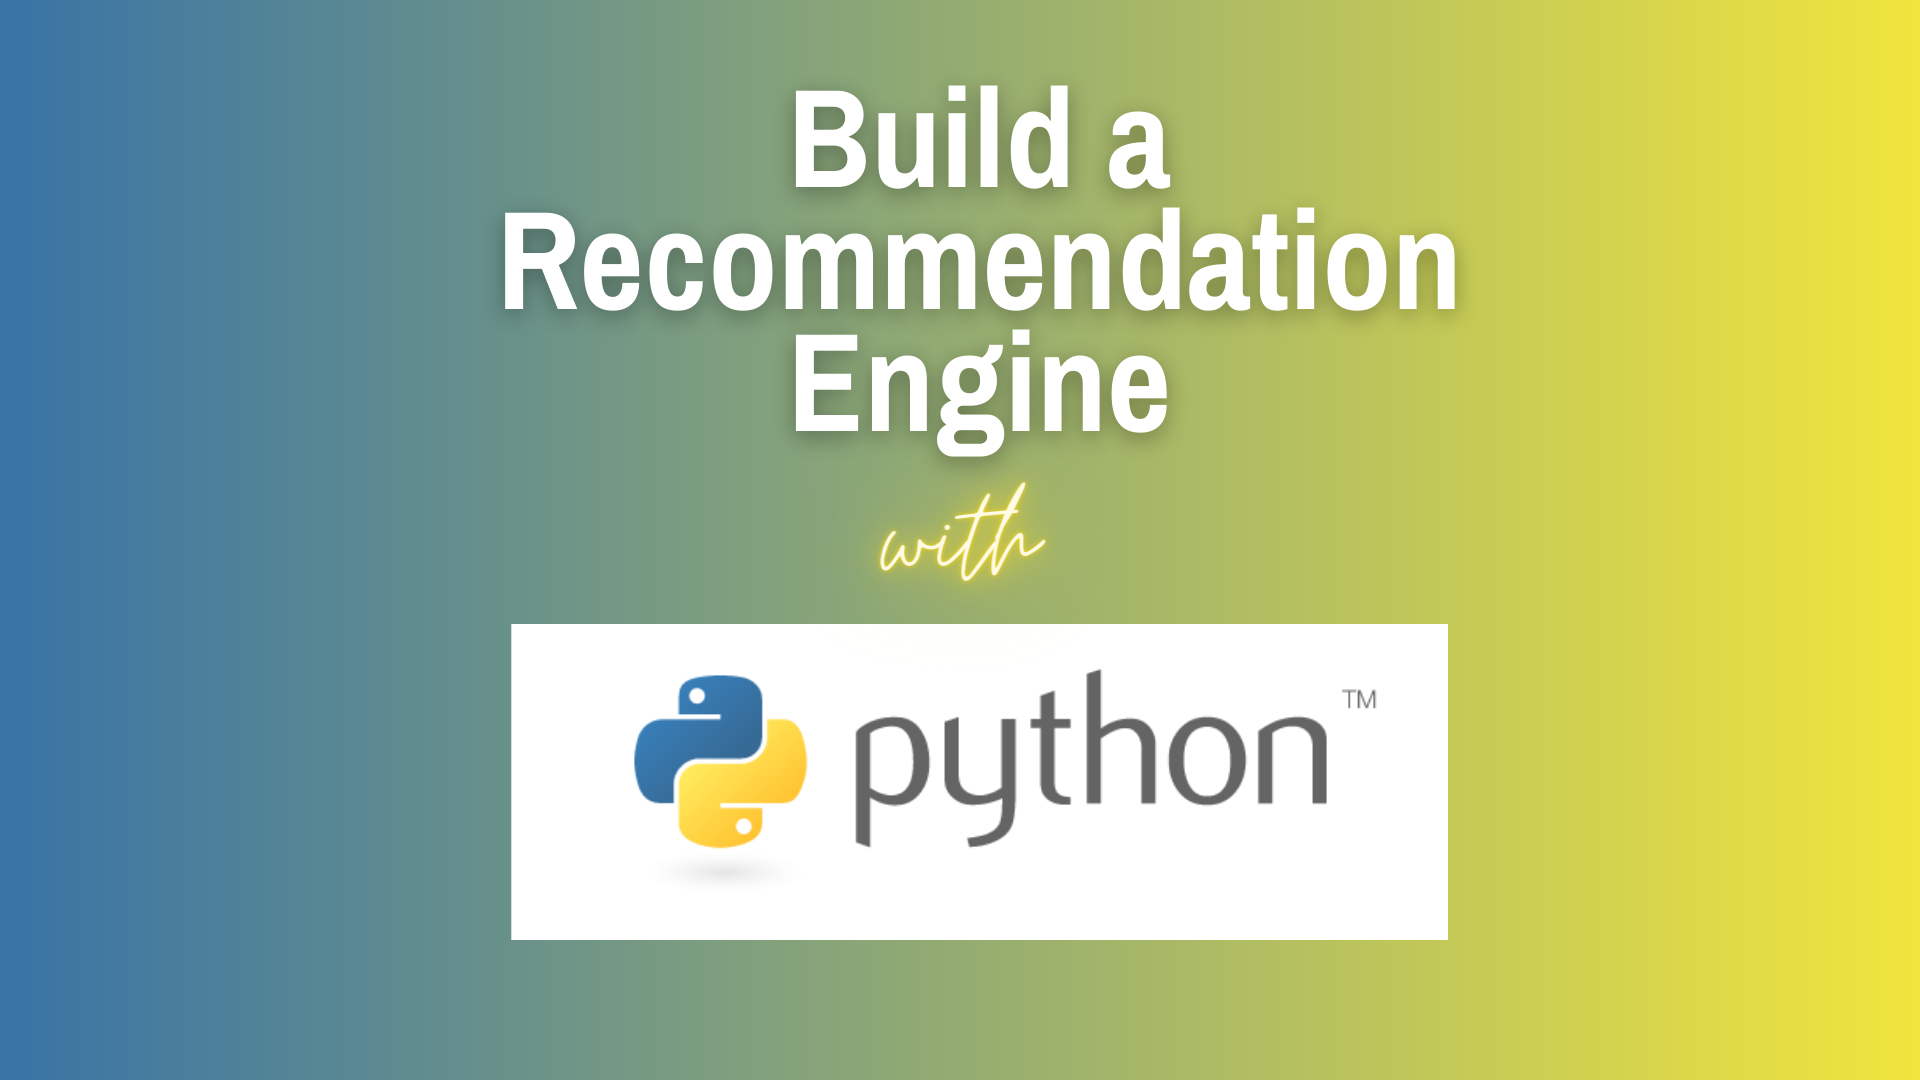 How to build a recommendation engine with python logo on blended yellow and blue background.